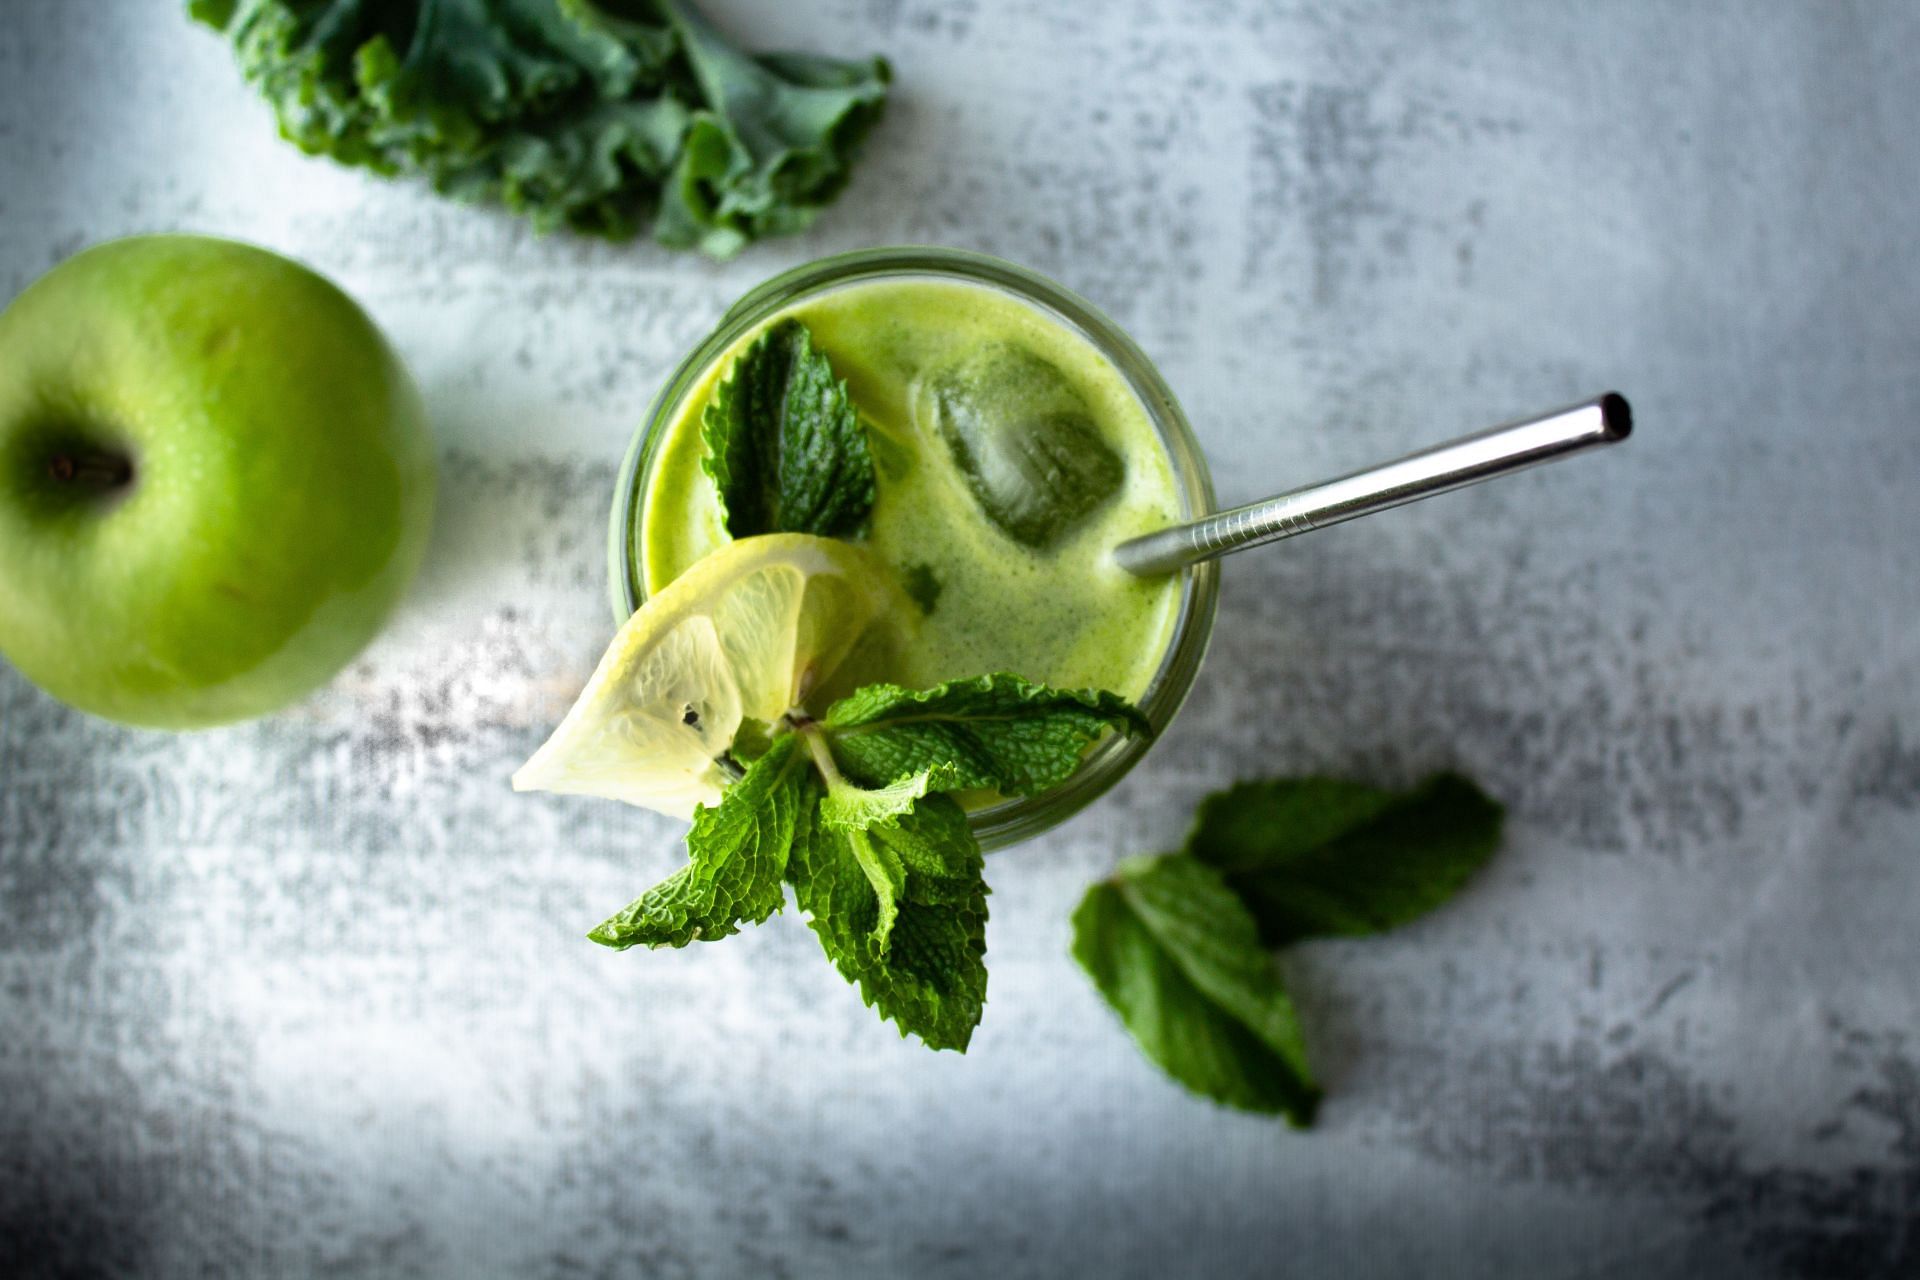 Green goddess contains kale, romaine, and spinach. (Image via Unsplash/ Christina Rumpf)